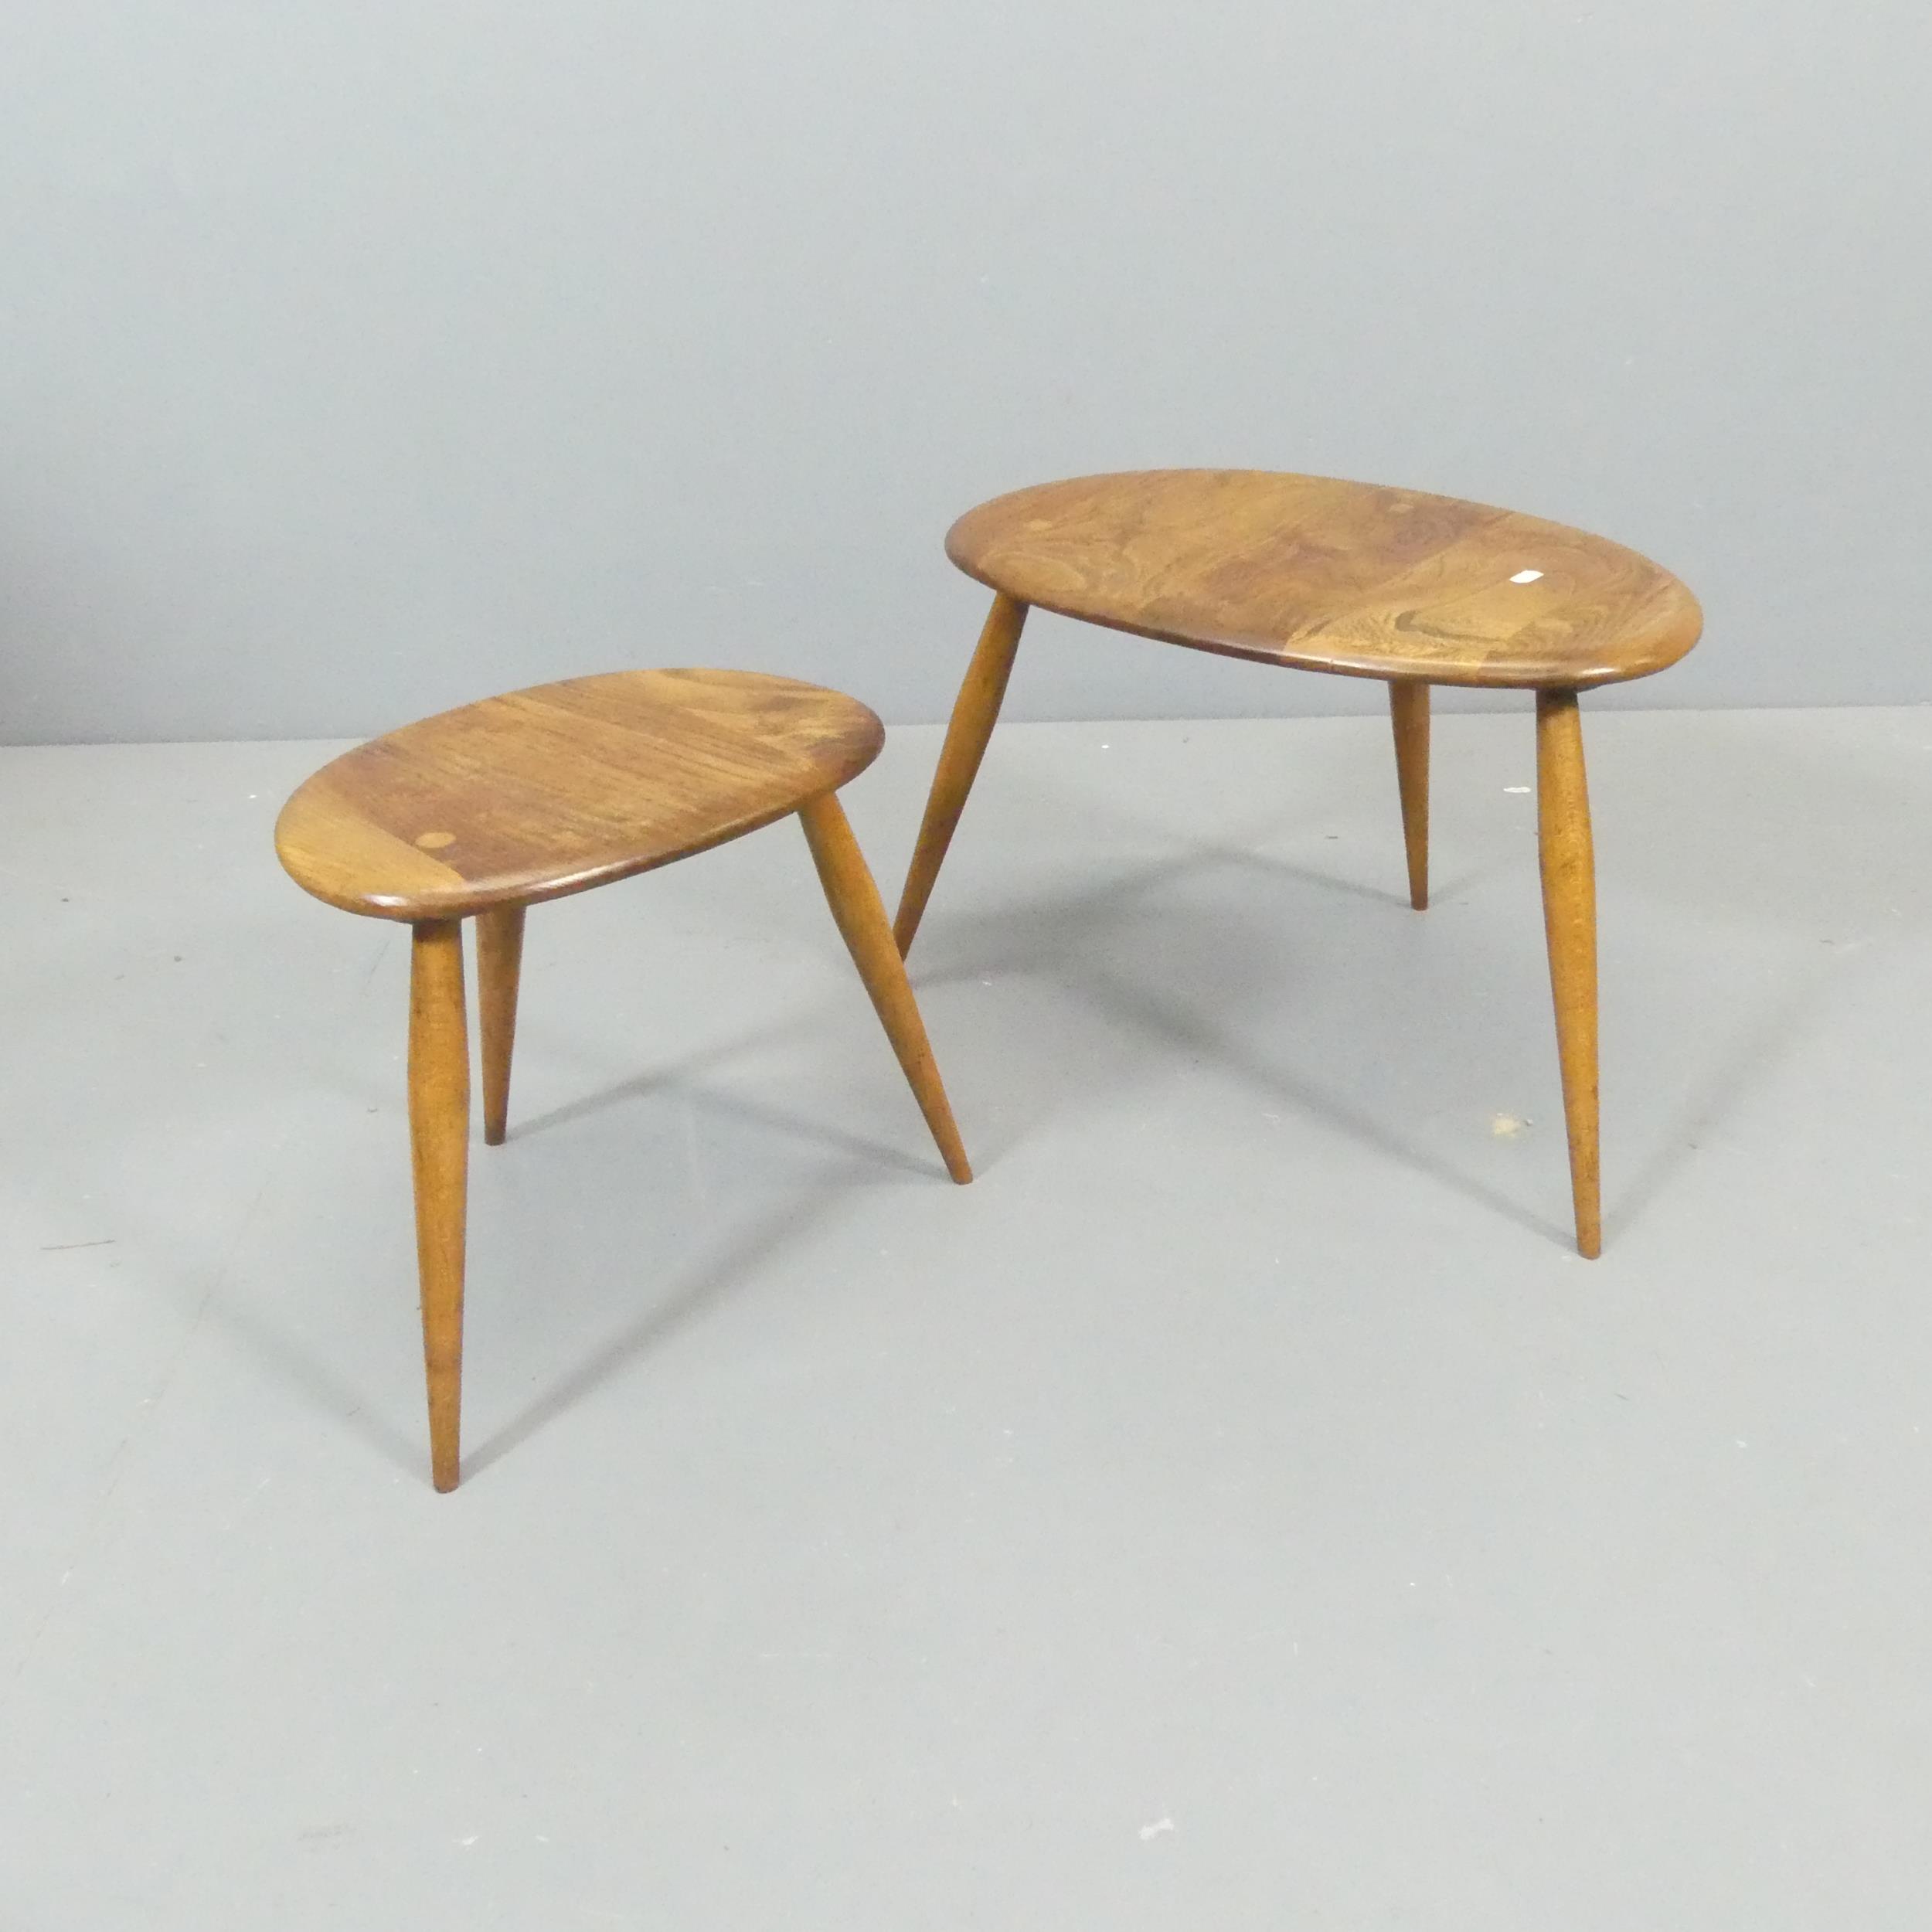 ERCOL - 2 nesting pebble tables. Largest - 50x36x34cm. These are likely tables 2 and 3, missing